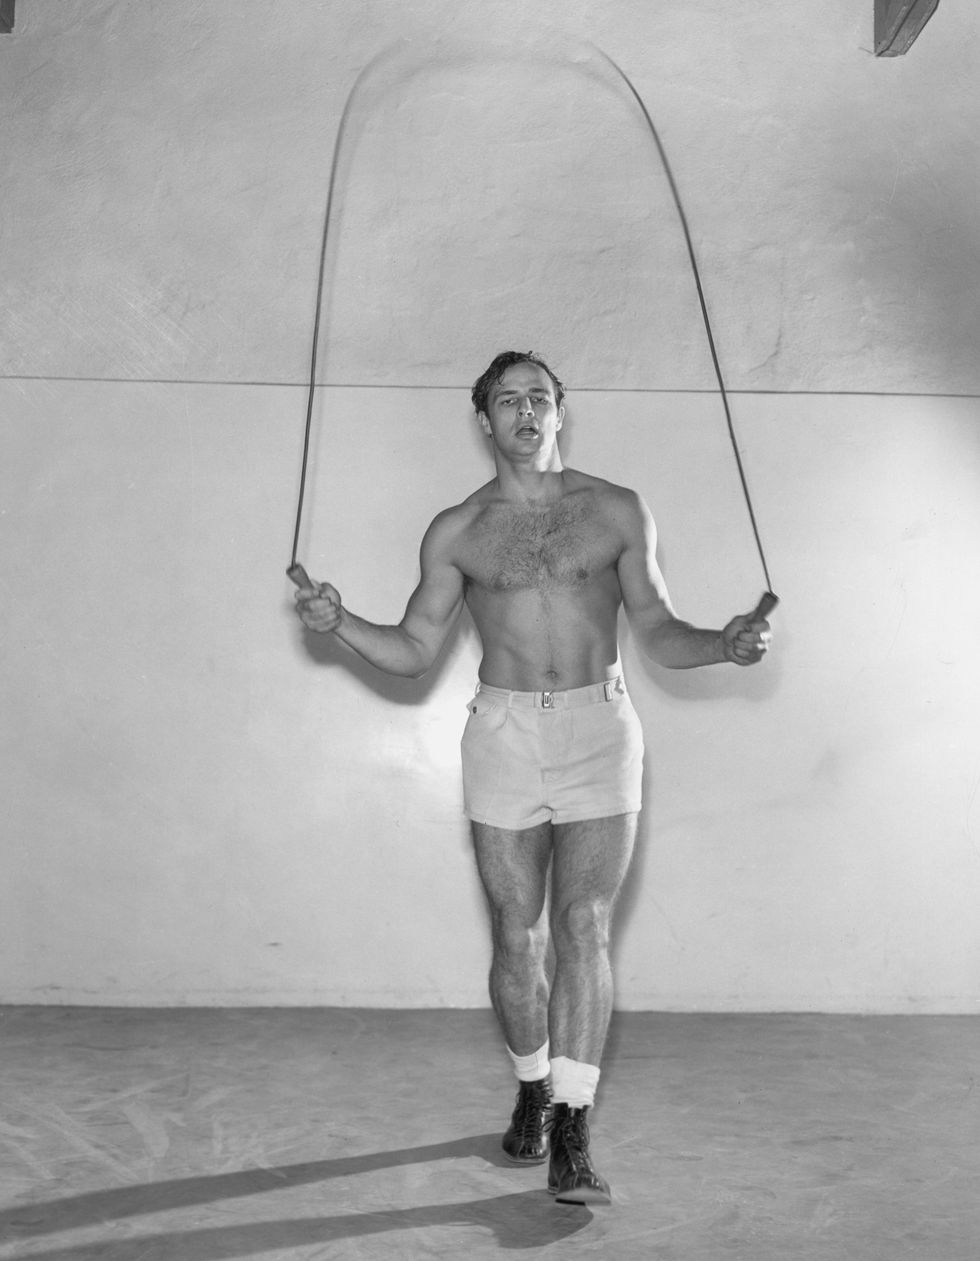 circa 1955  american actor marlon brando jumps rope wearing boots, shorts and no shirt  photo by hulton archivegetty images